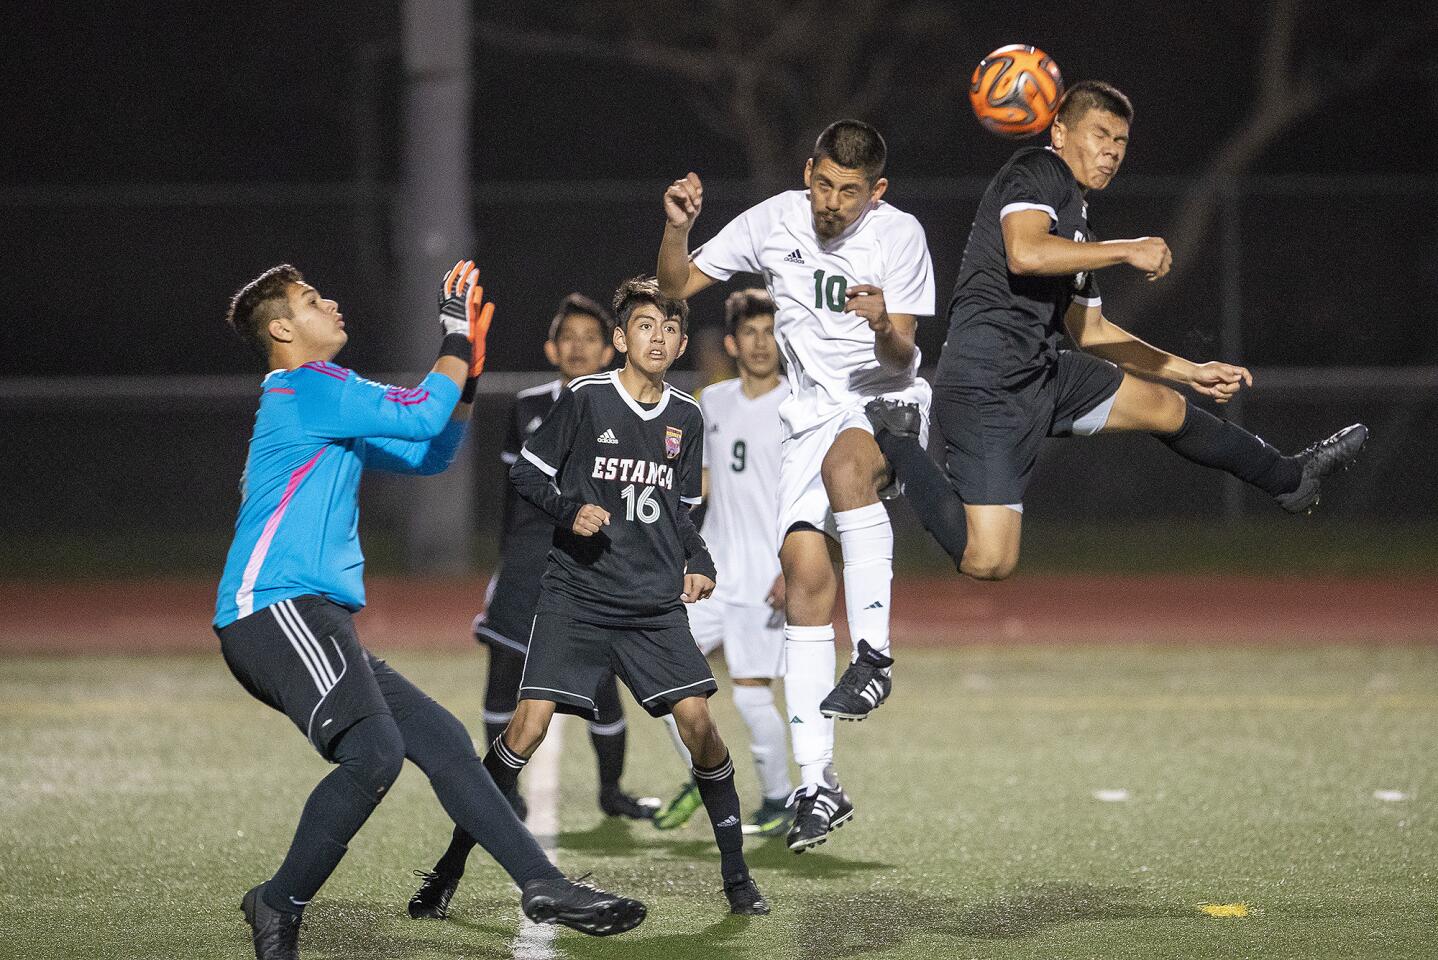 Estancia High's Marcos Arreola, right, goes up for a header against Saddleback's Victor Lima during an Orange Coast League match at home on Friday.